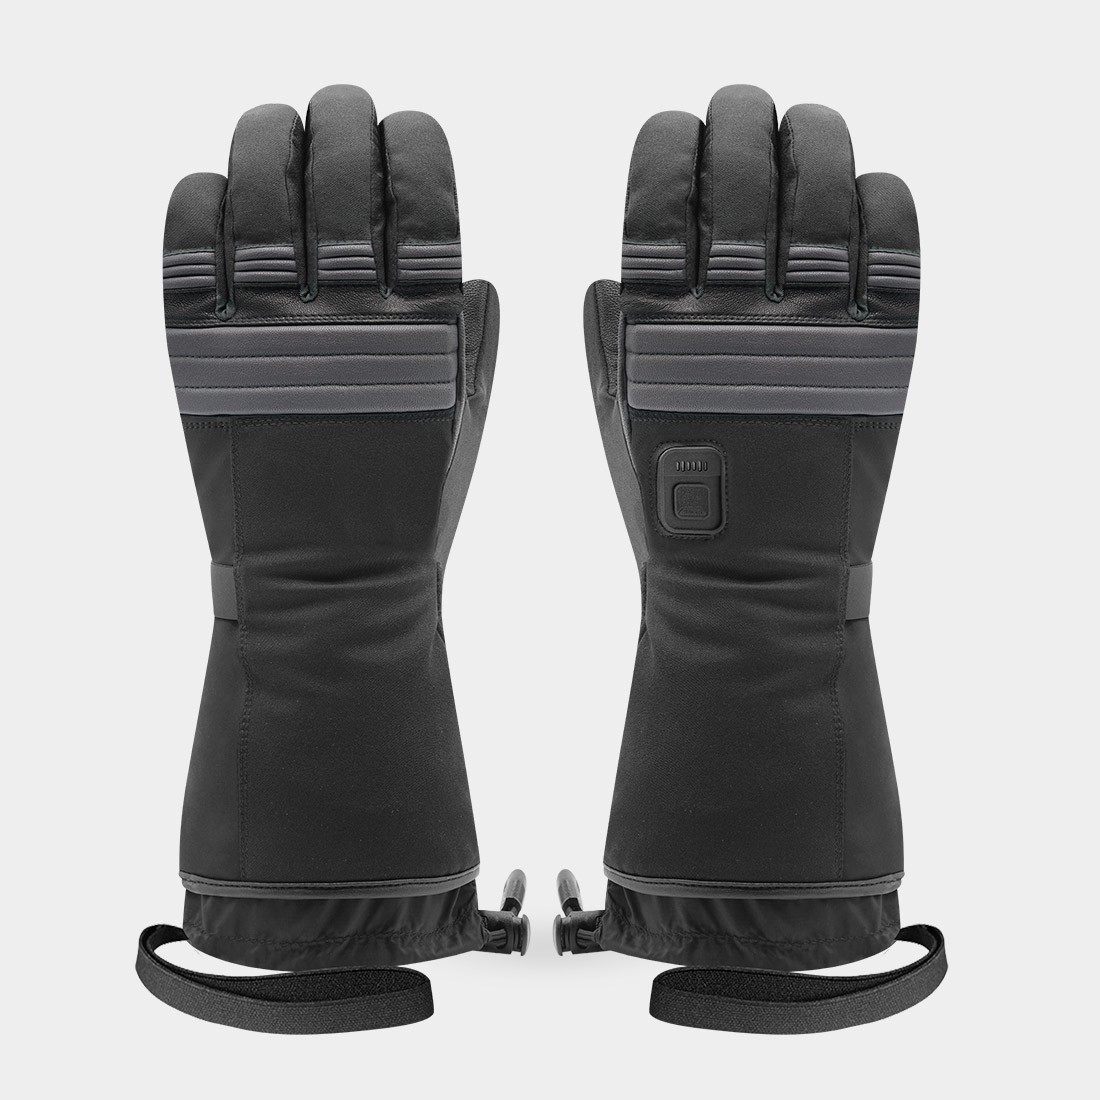 CONNECTIC 5 - Heated glove